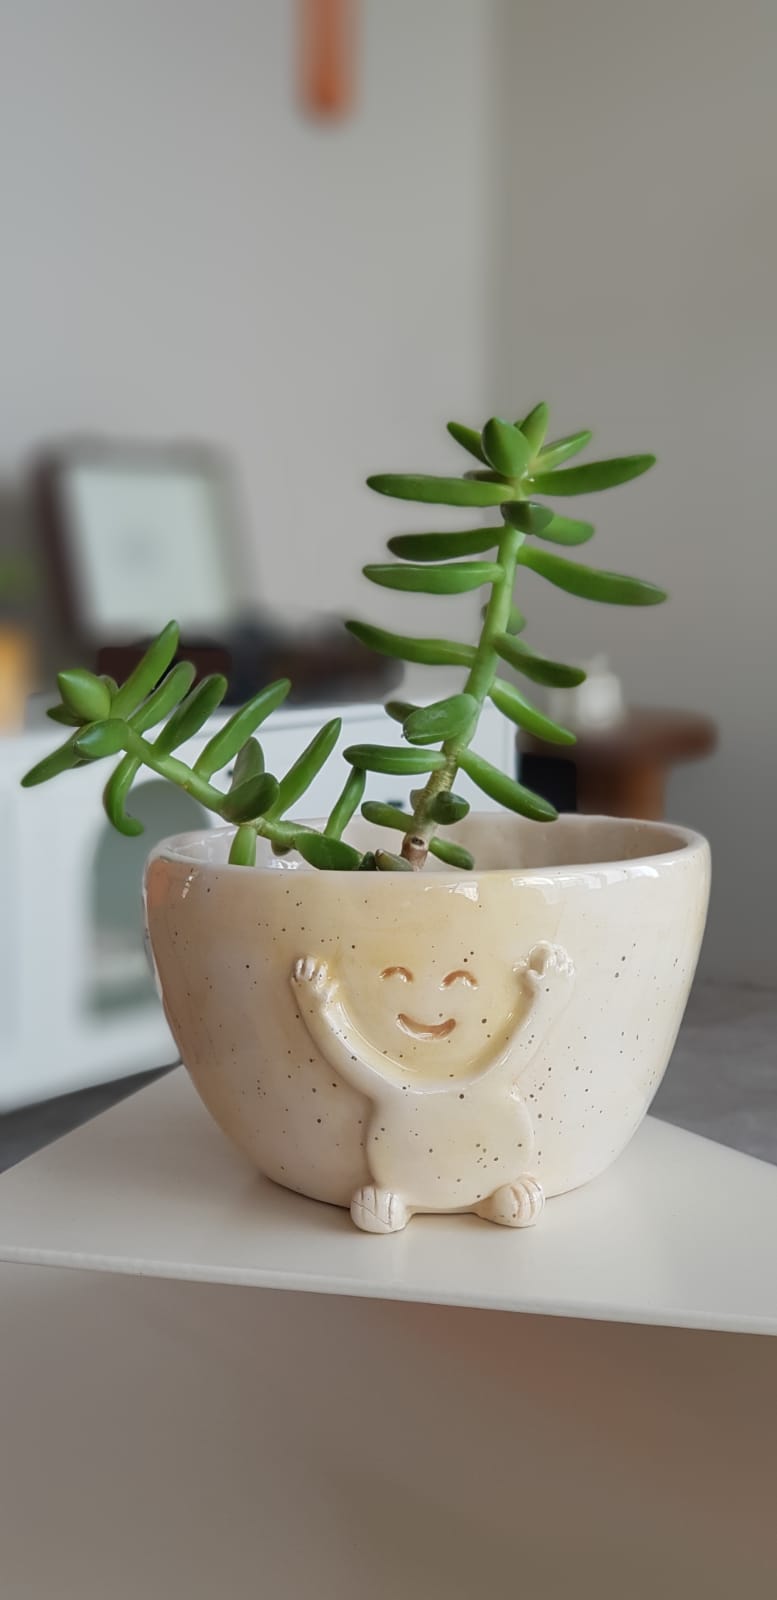 Cheerful ceramic planter with arms raised in triumph, a symbol of growth and joy with its residing succulent.